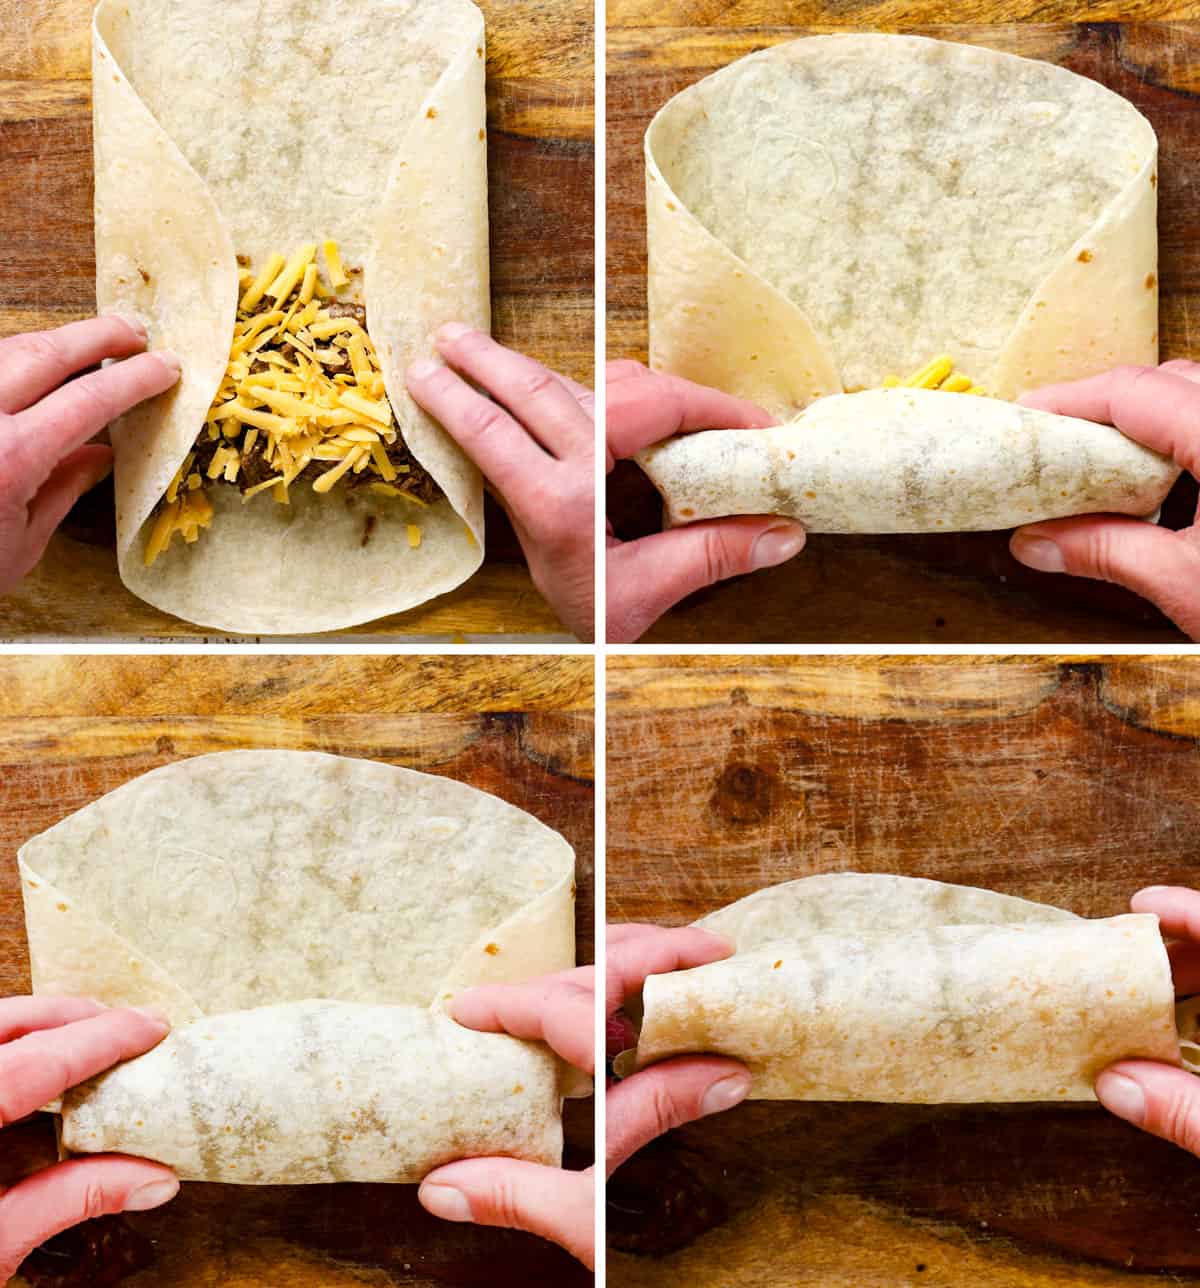 a collage showing how to make chimichangas by adding beef and cheese to tortillas, then rolling up burrito style